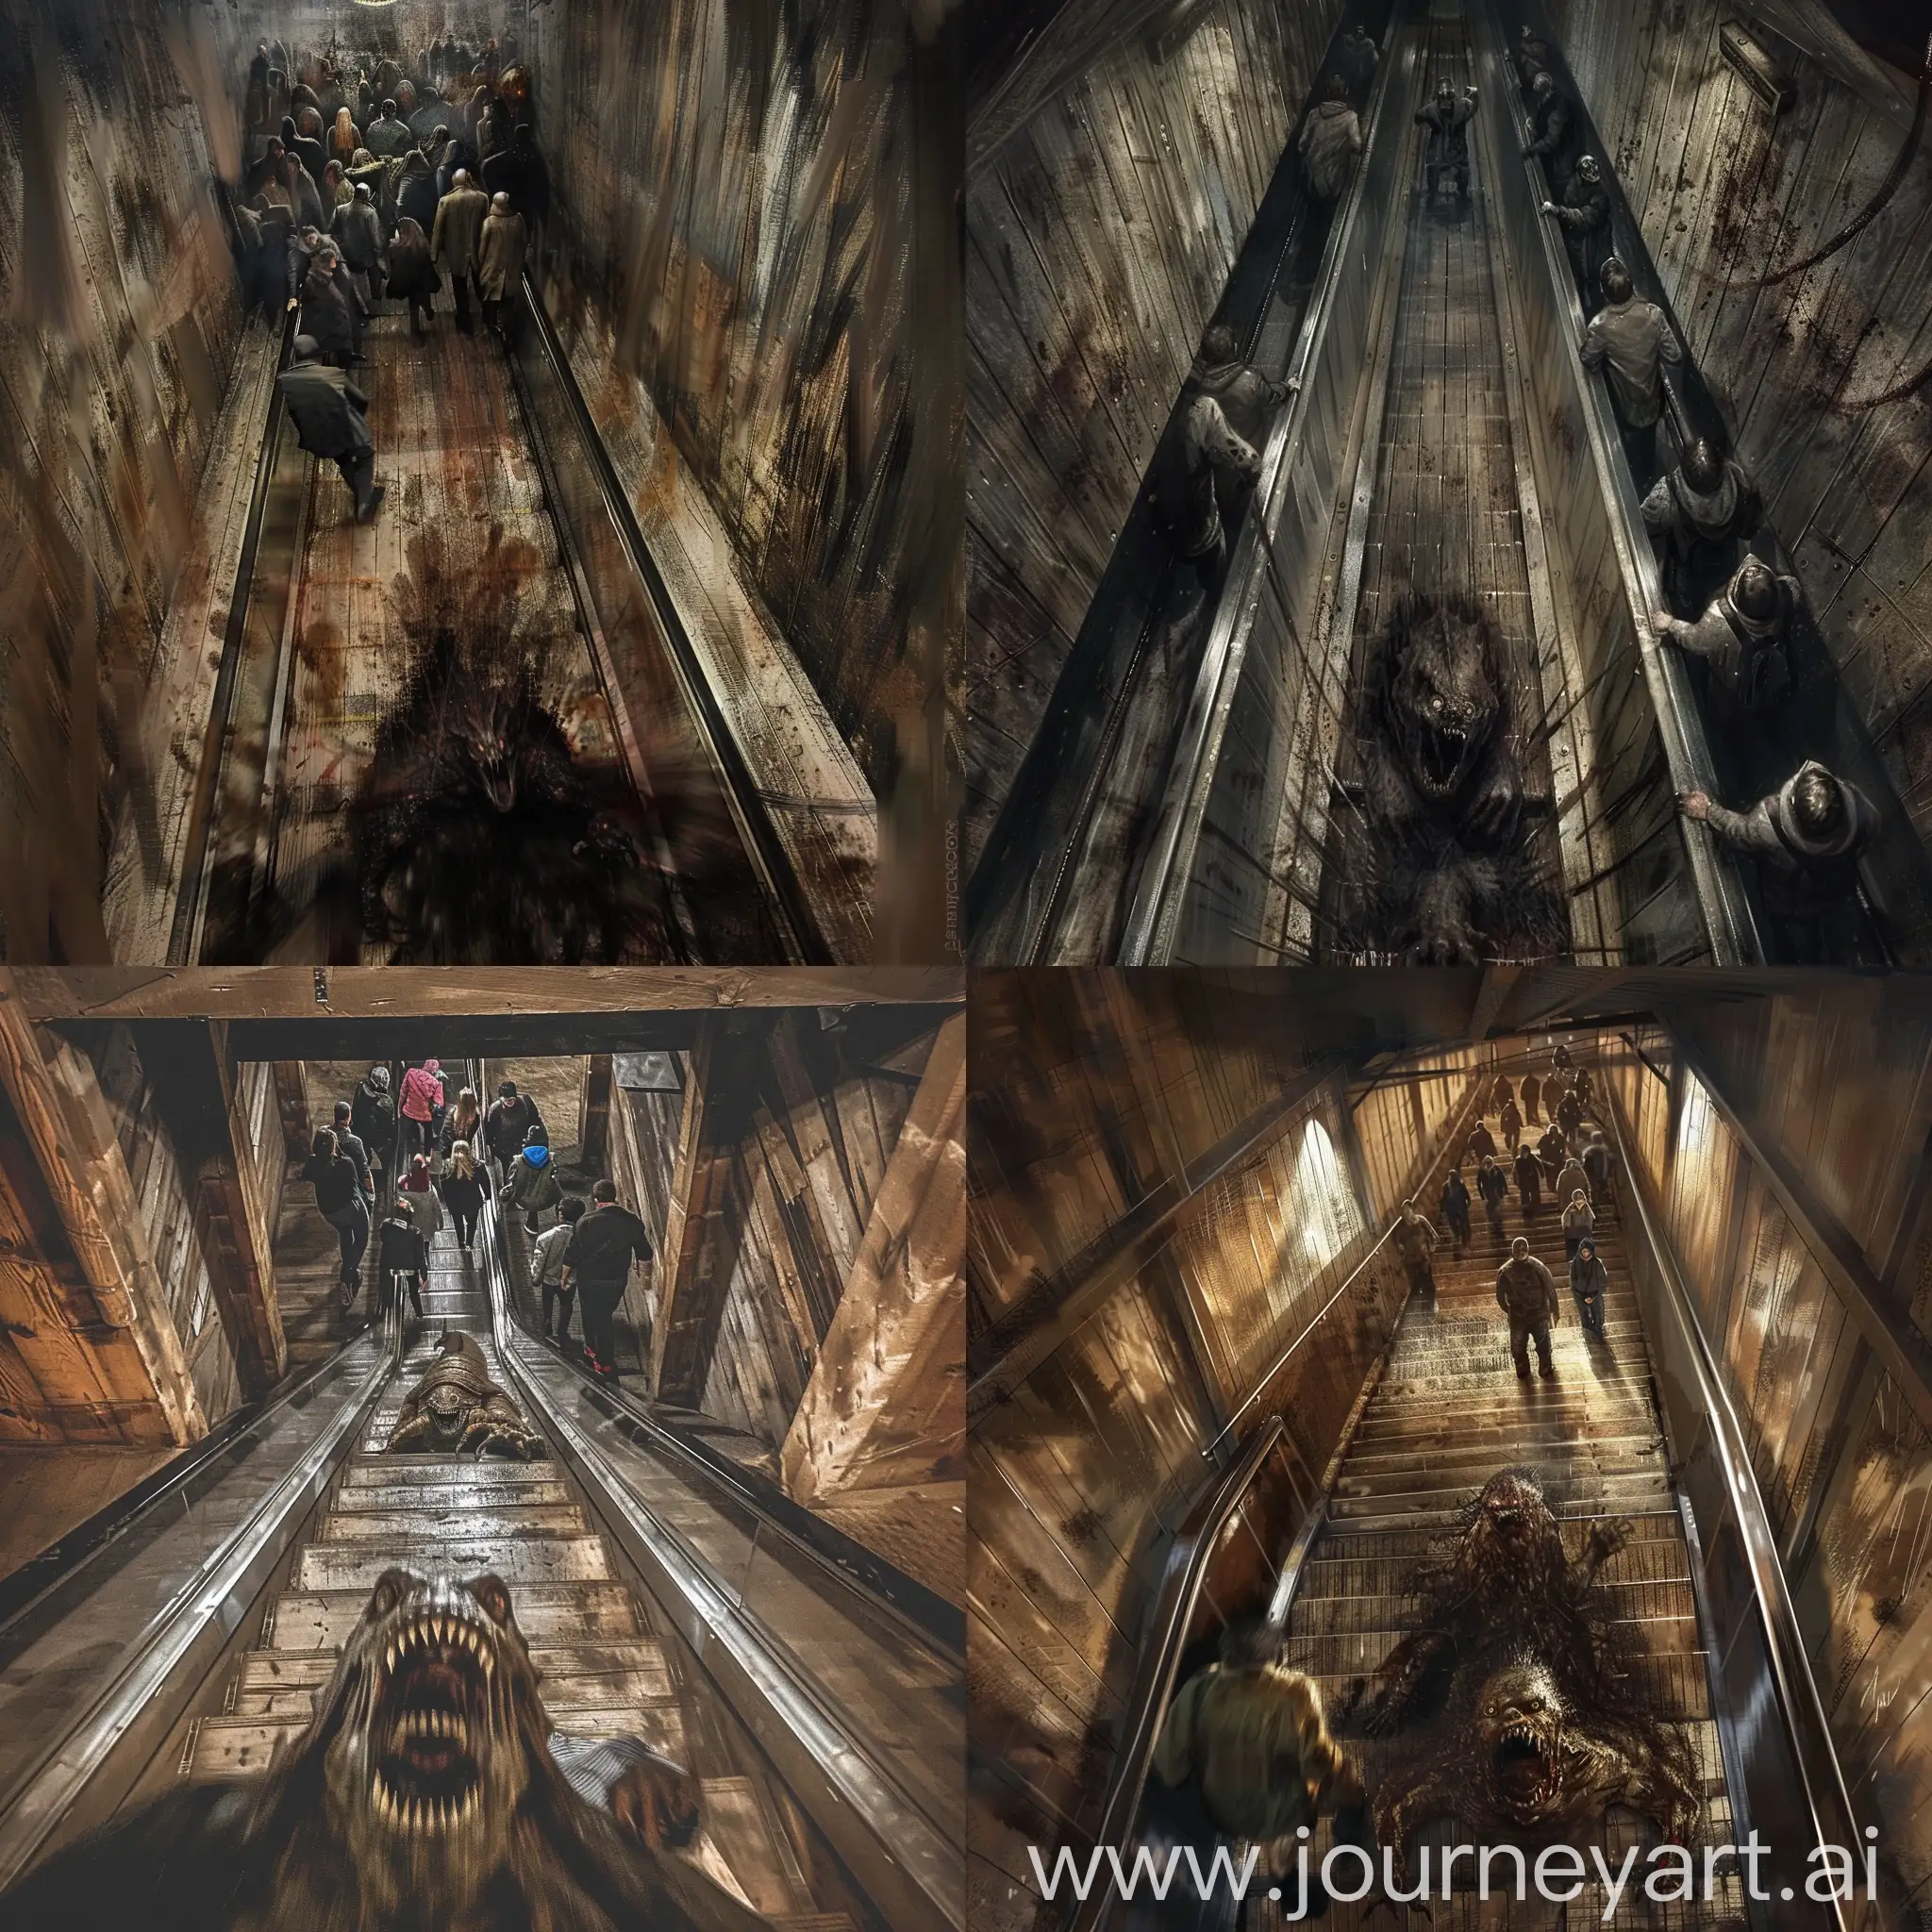 The view from the top of a wooden subway escalator.  At  the bottom of the escalator is a horrible  monster.  The people going down the  descending escalator and scared and frightened people are rushing  up the  ascending  escalator.  Disturbing. Gothic. Horror